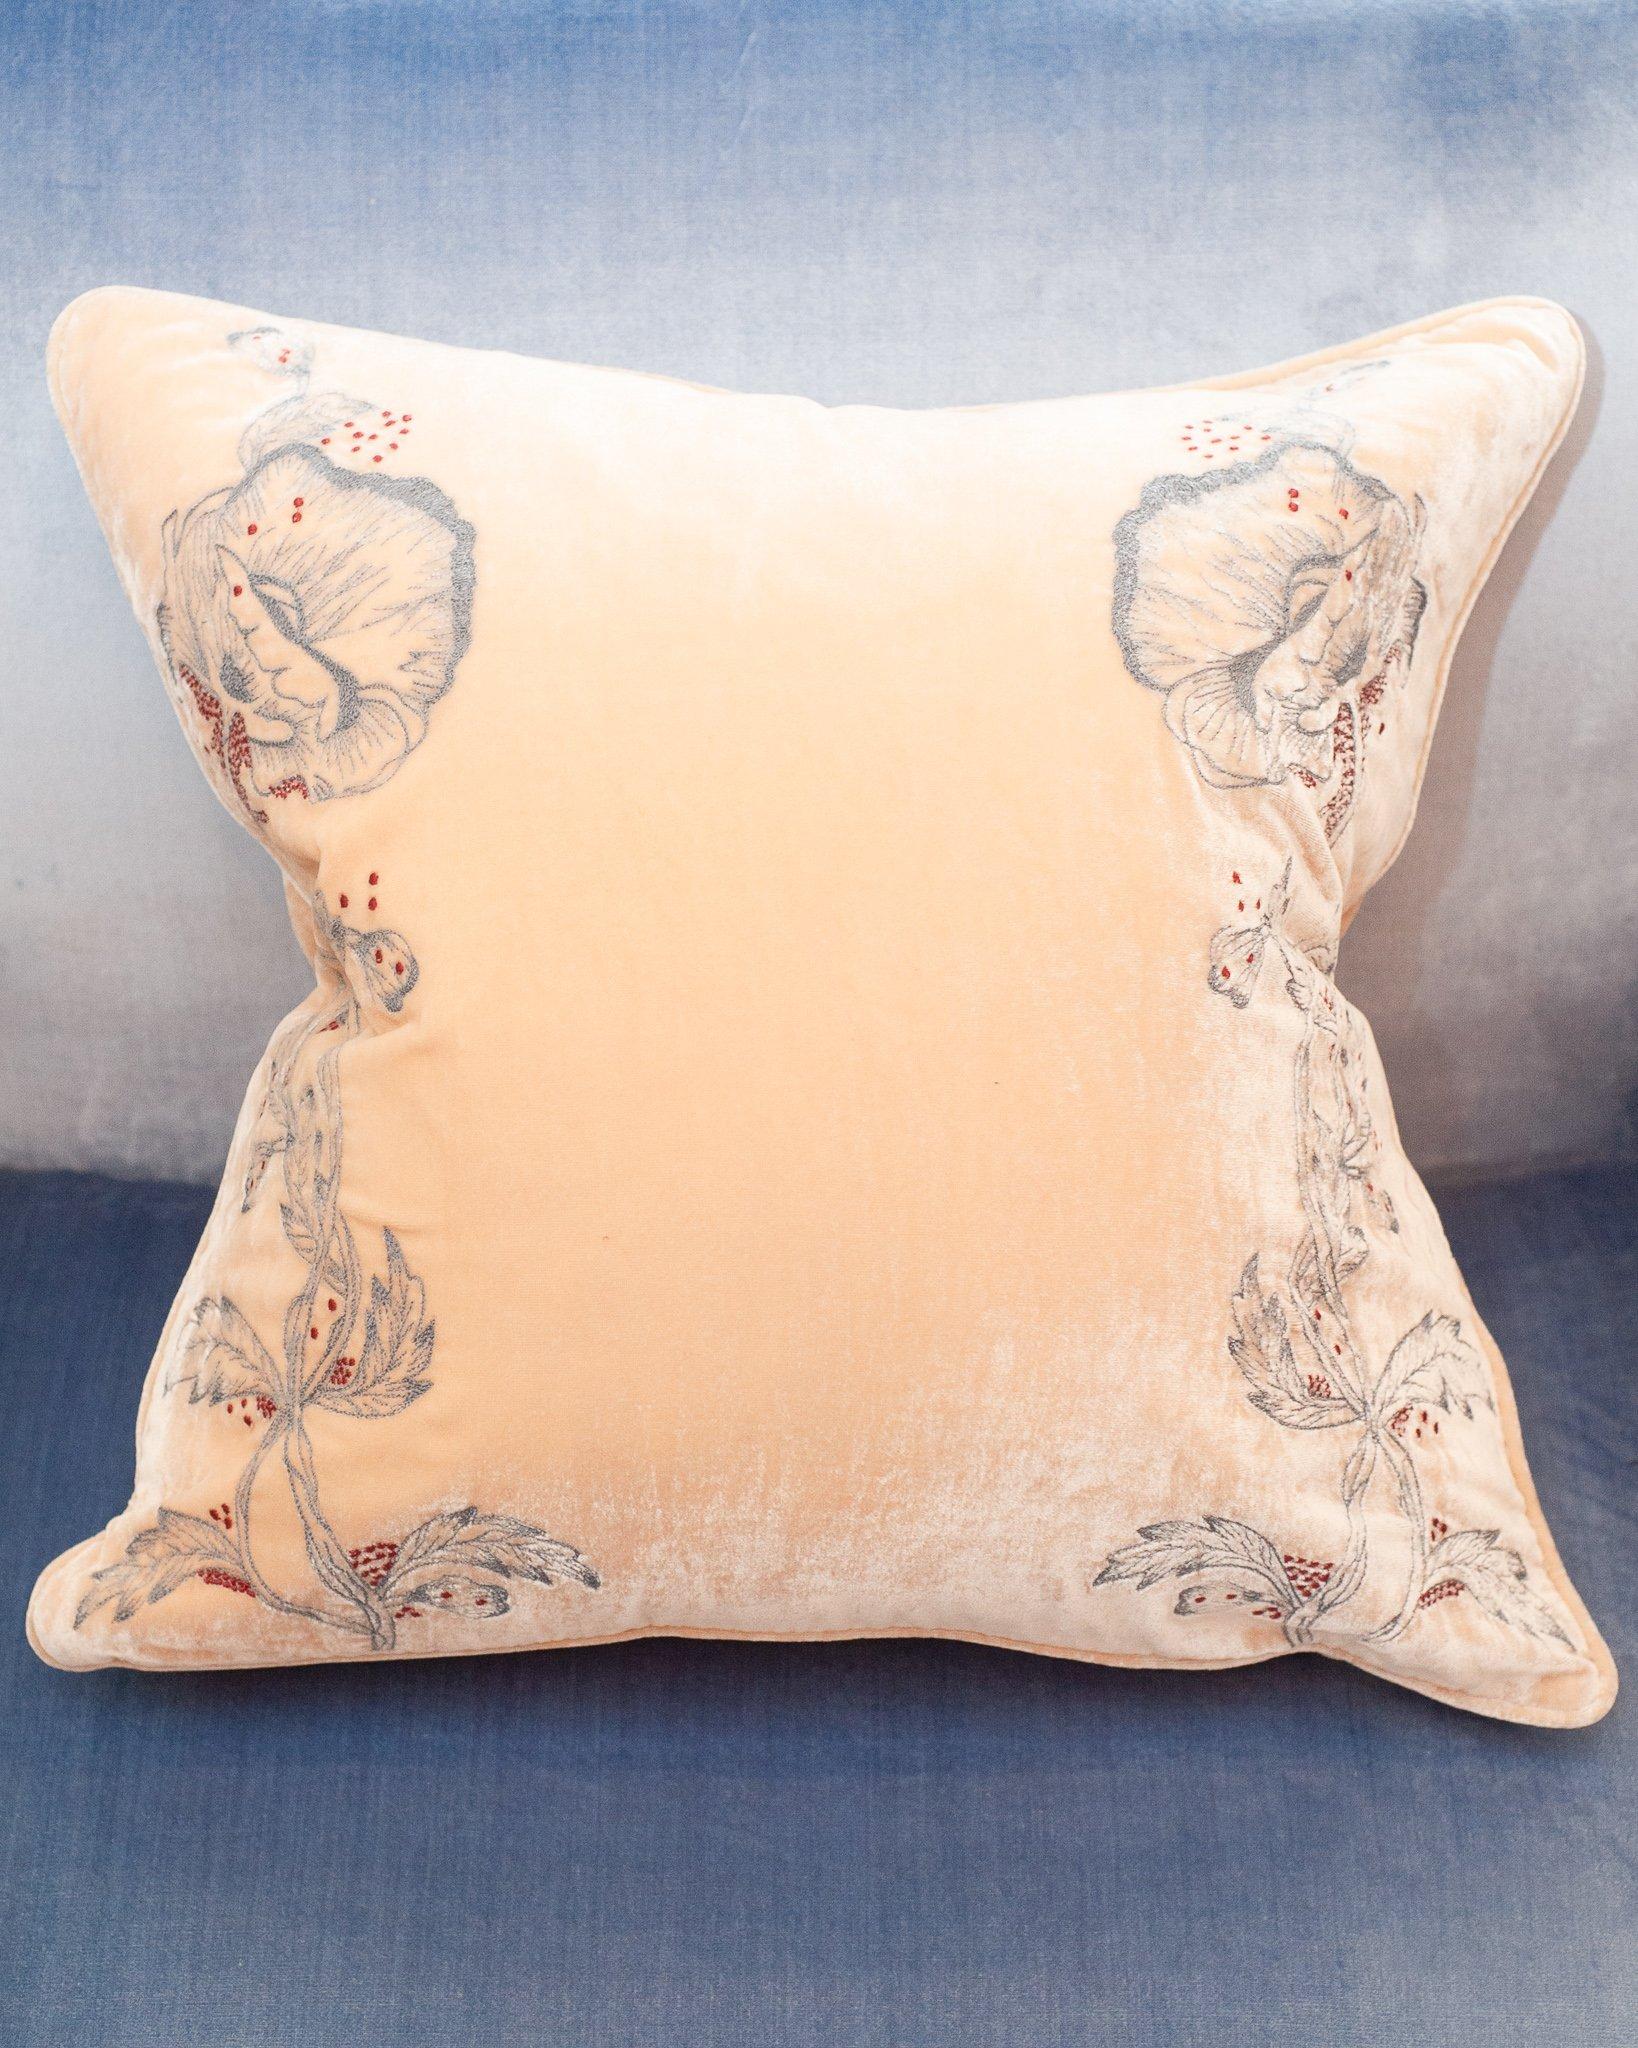 A pair of nude silk velvet floral-embroidered cushion from Anke Dreschel featuring floral embroidery, square shape and concealed rear zip fastening. Filled with 100% Canadian feather and down.